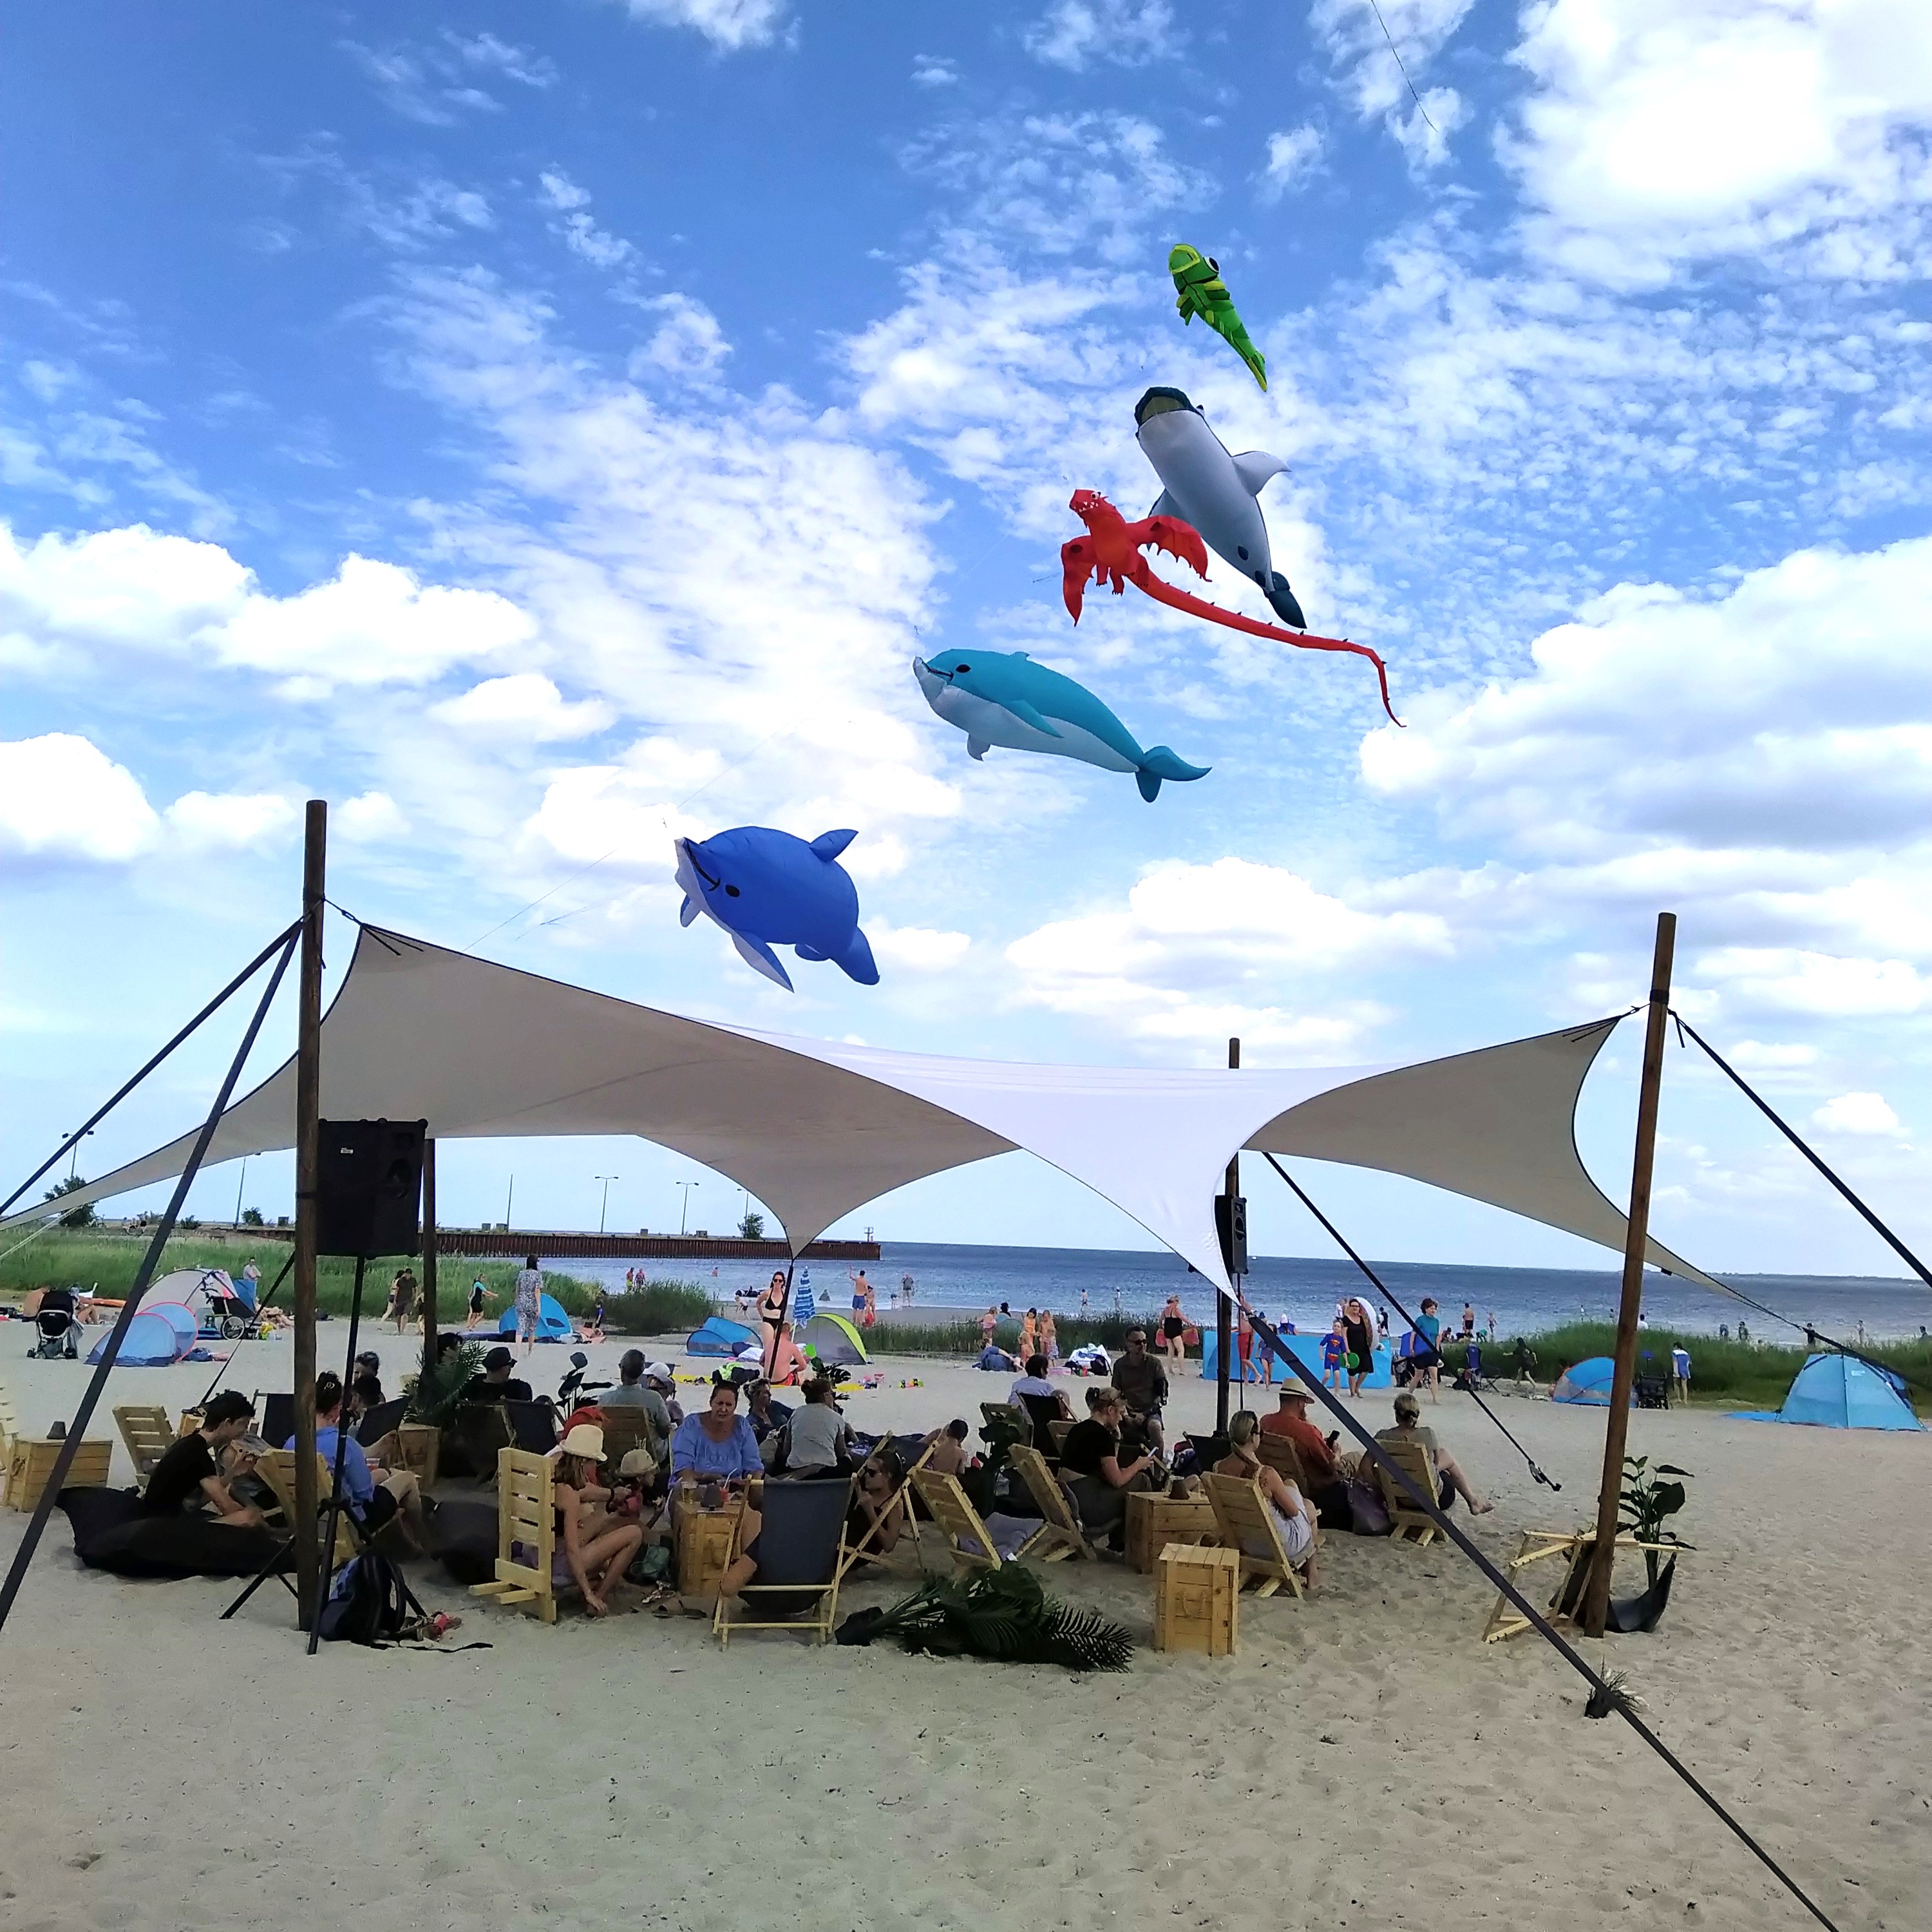 Colorful kites in the sky, beach lounge with visitors, the Baltic Sea in the background